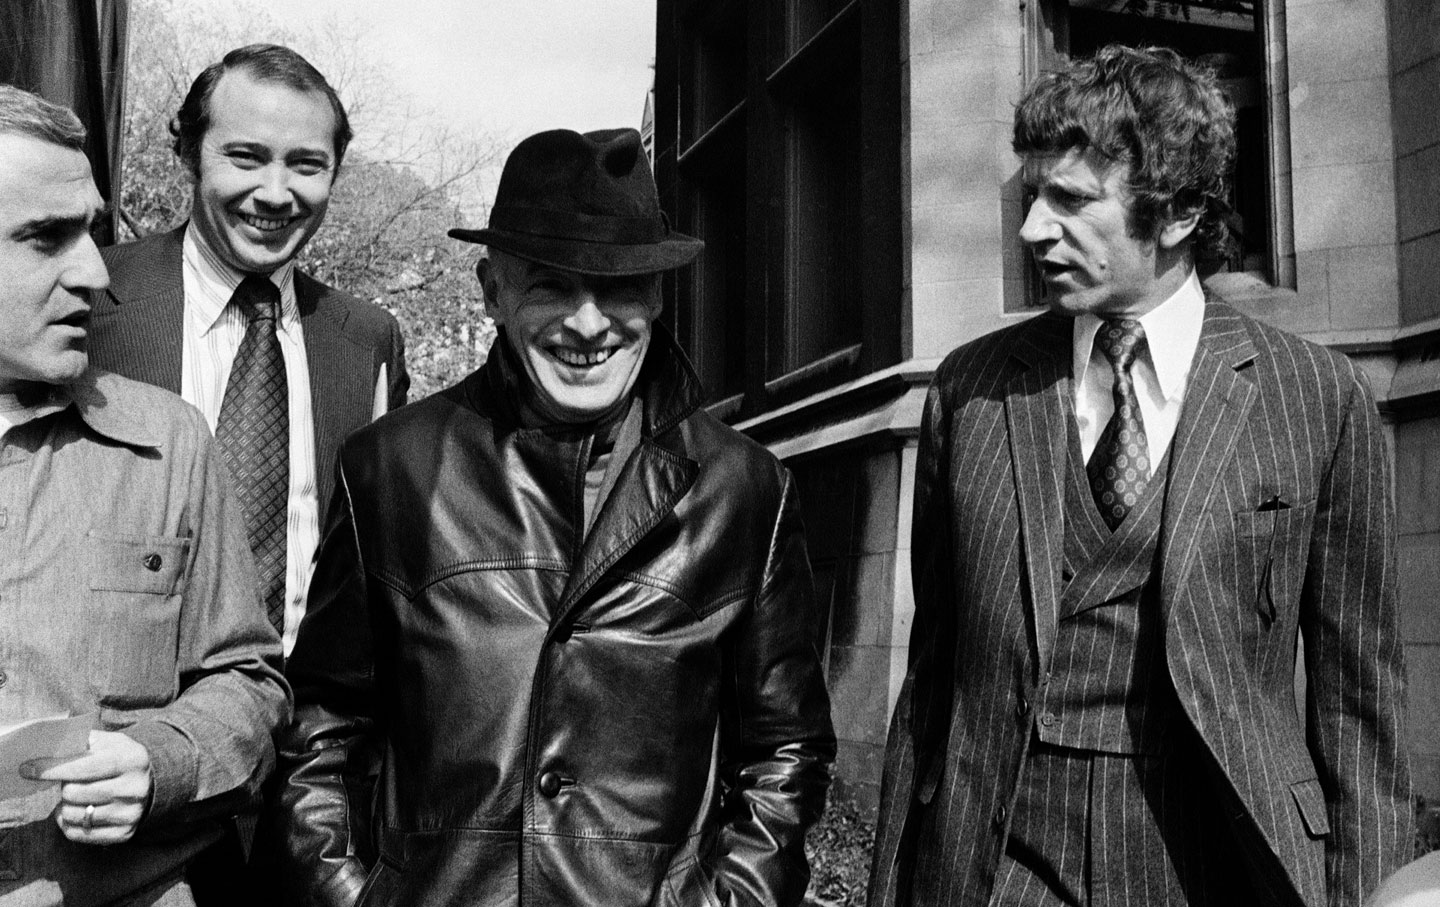 Saul Bellow (middle) after acknowledging his receipt of the Nobel Prize in Literature, October 22, 1976. (Credit: Charles Knoblock / AP)